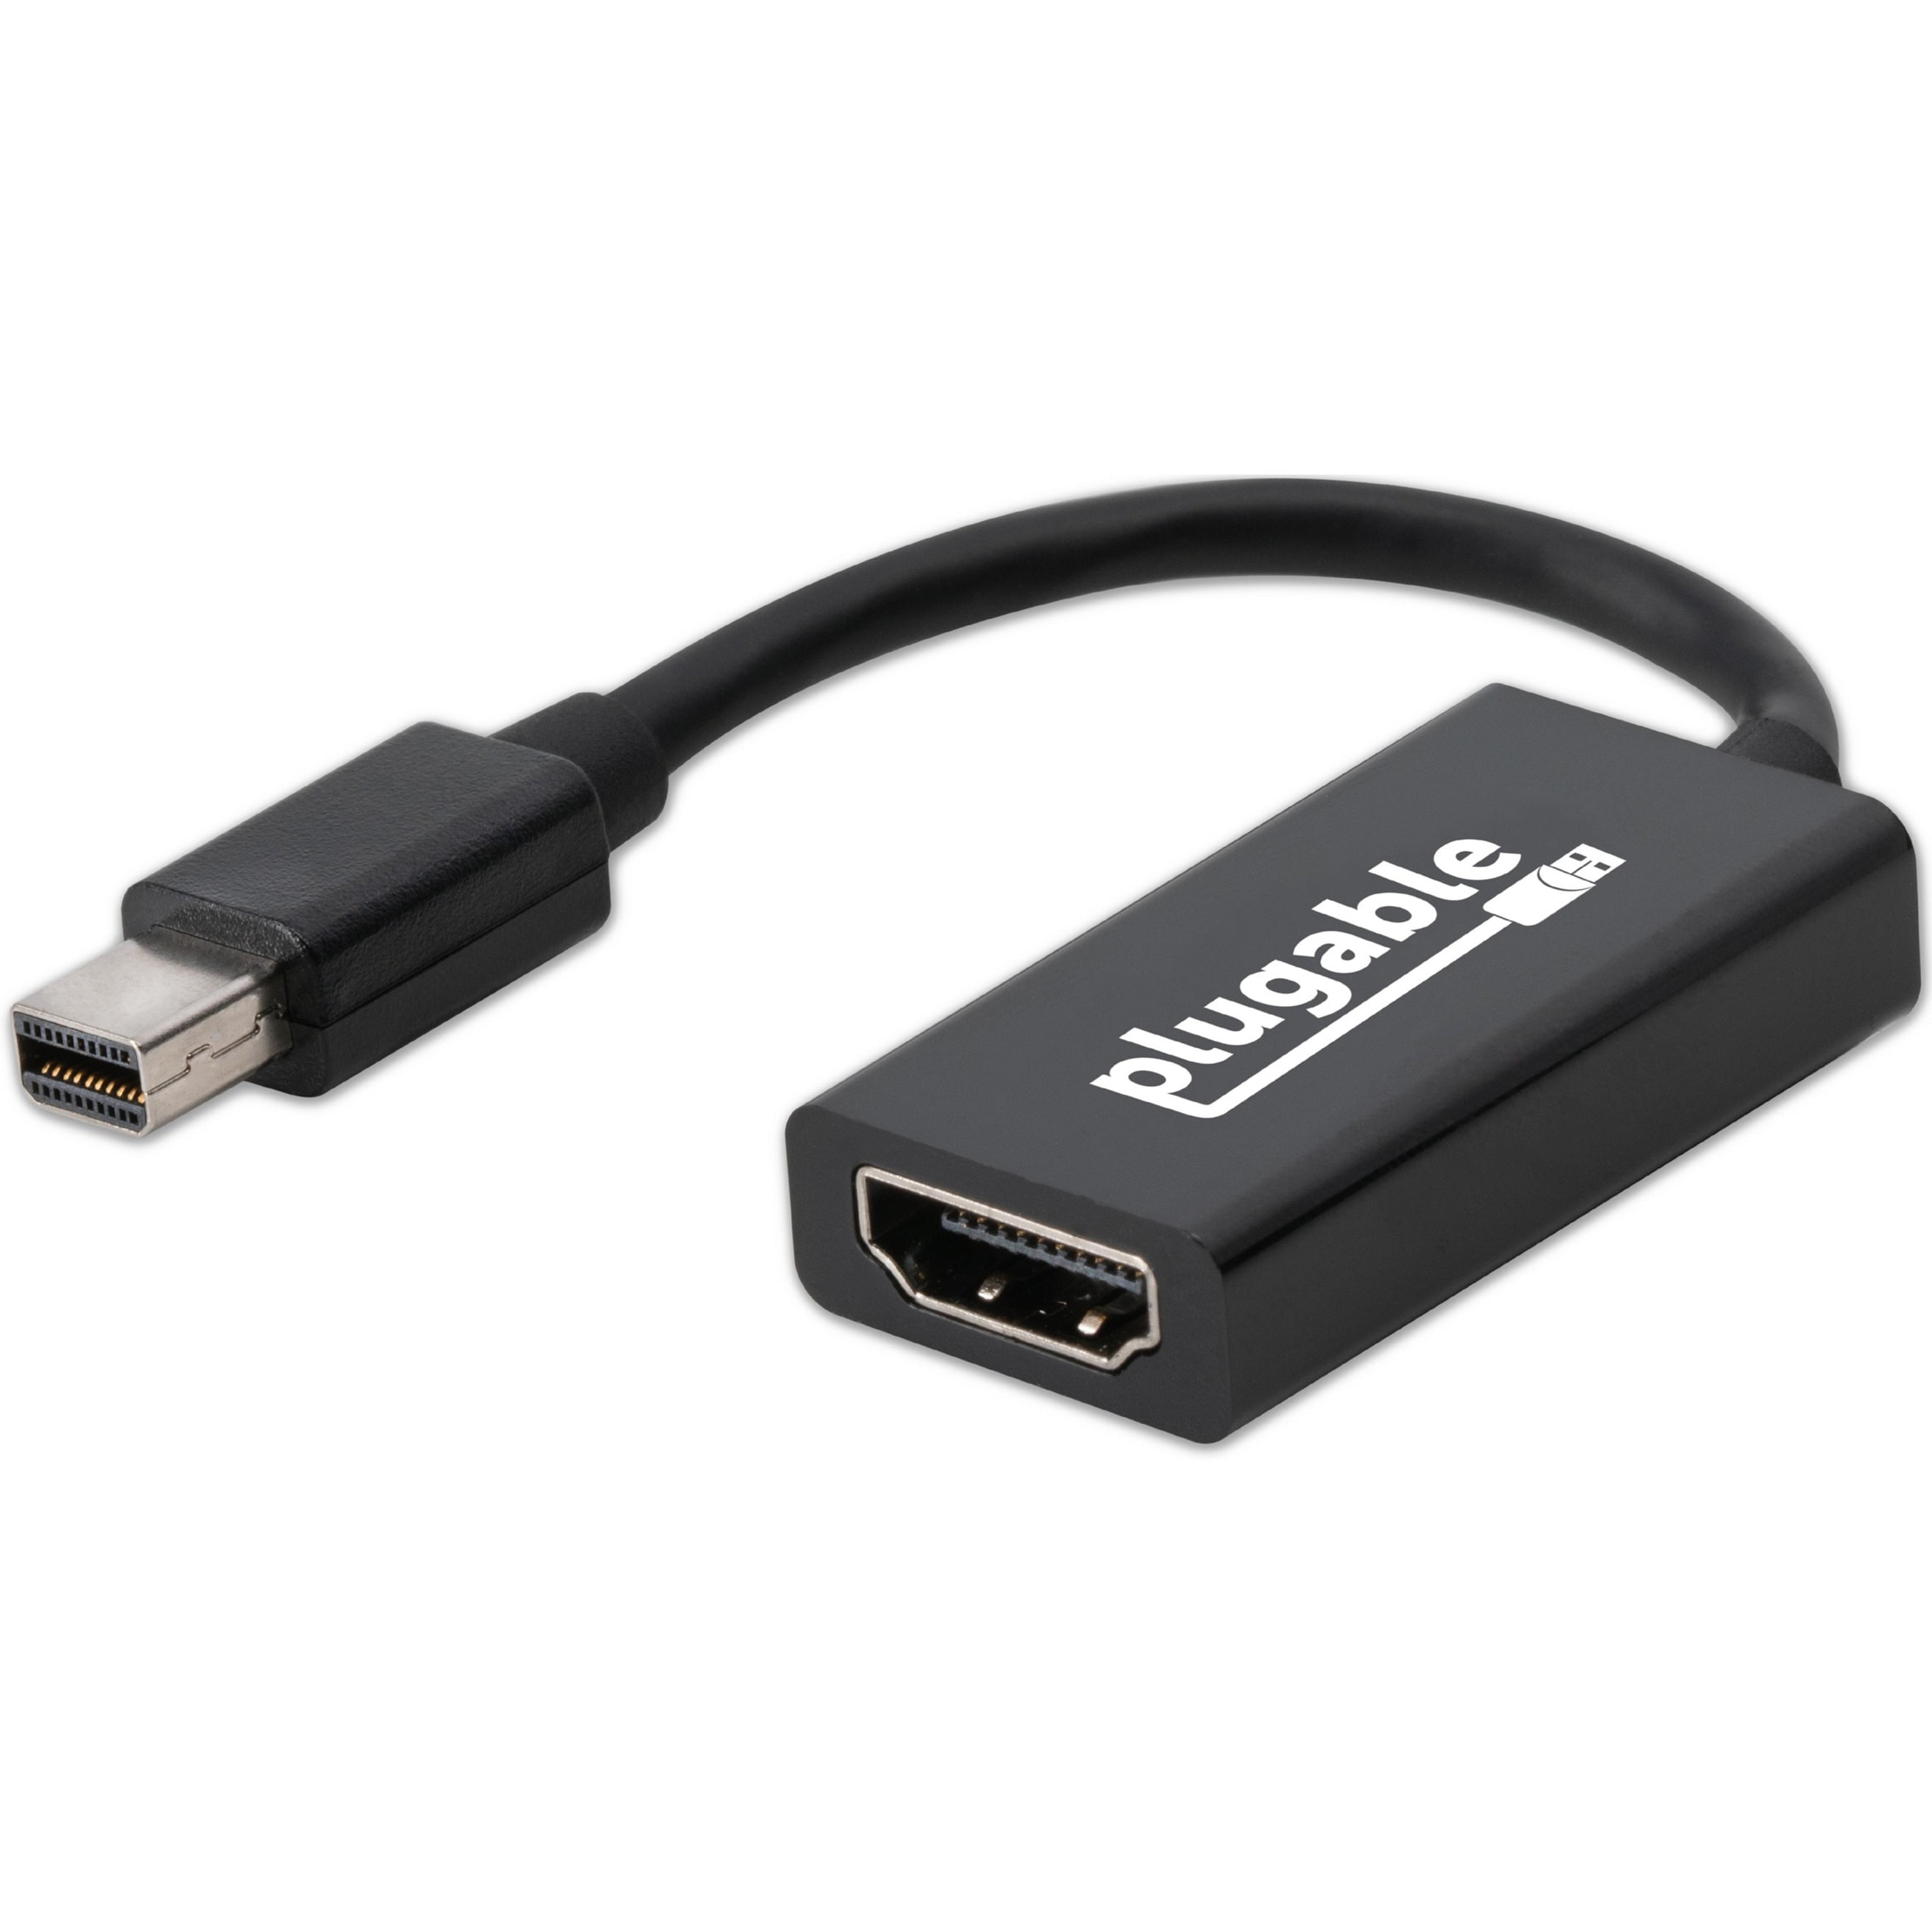 Supports 4K / UHD / 3840x2160@60Hz 1080 Active DisplayPort to HDMI 2.0 Adapter 